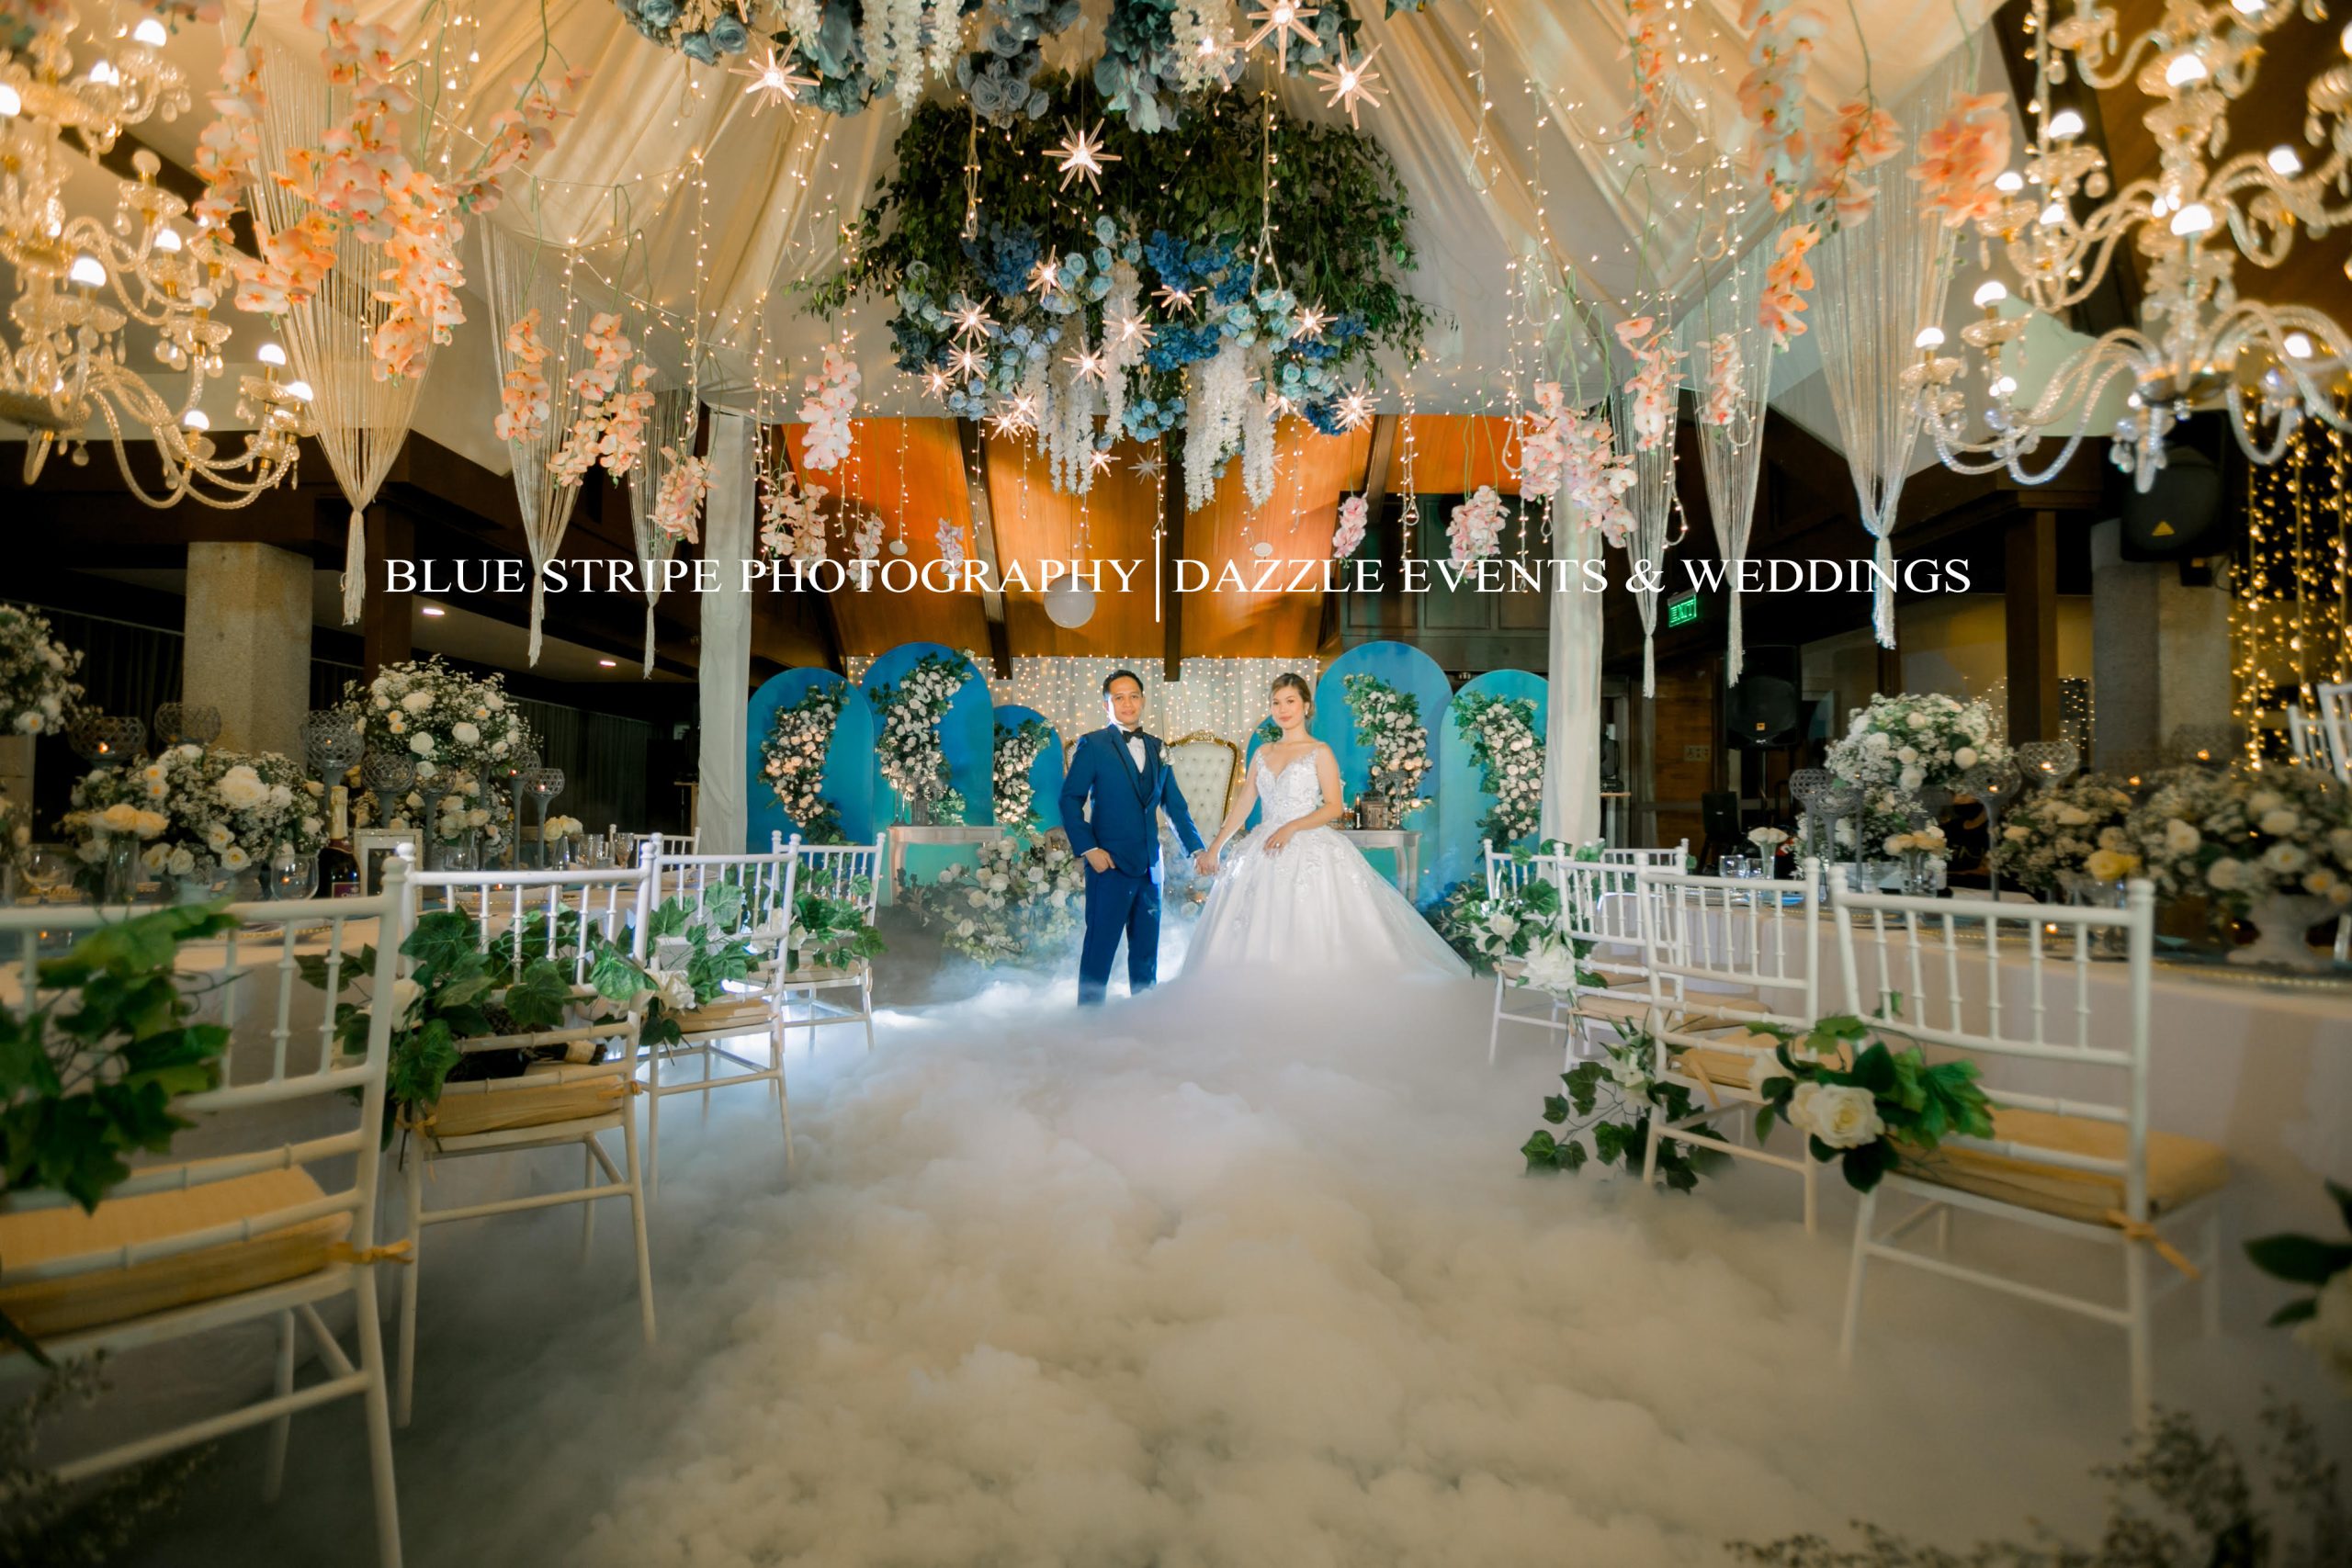 unnamed 3 scaled - Dazzle Events And Weddings - Eduard & Alyana